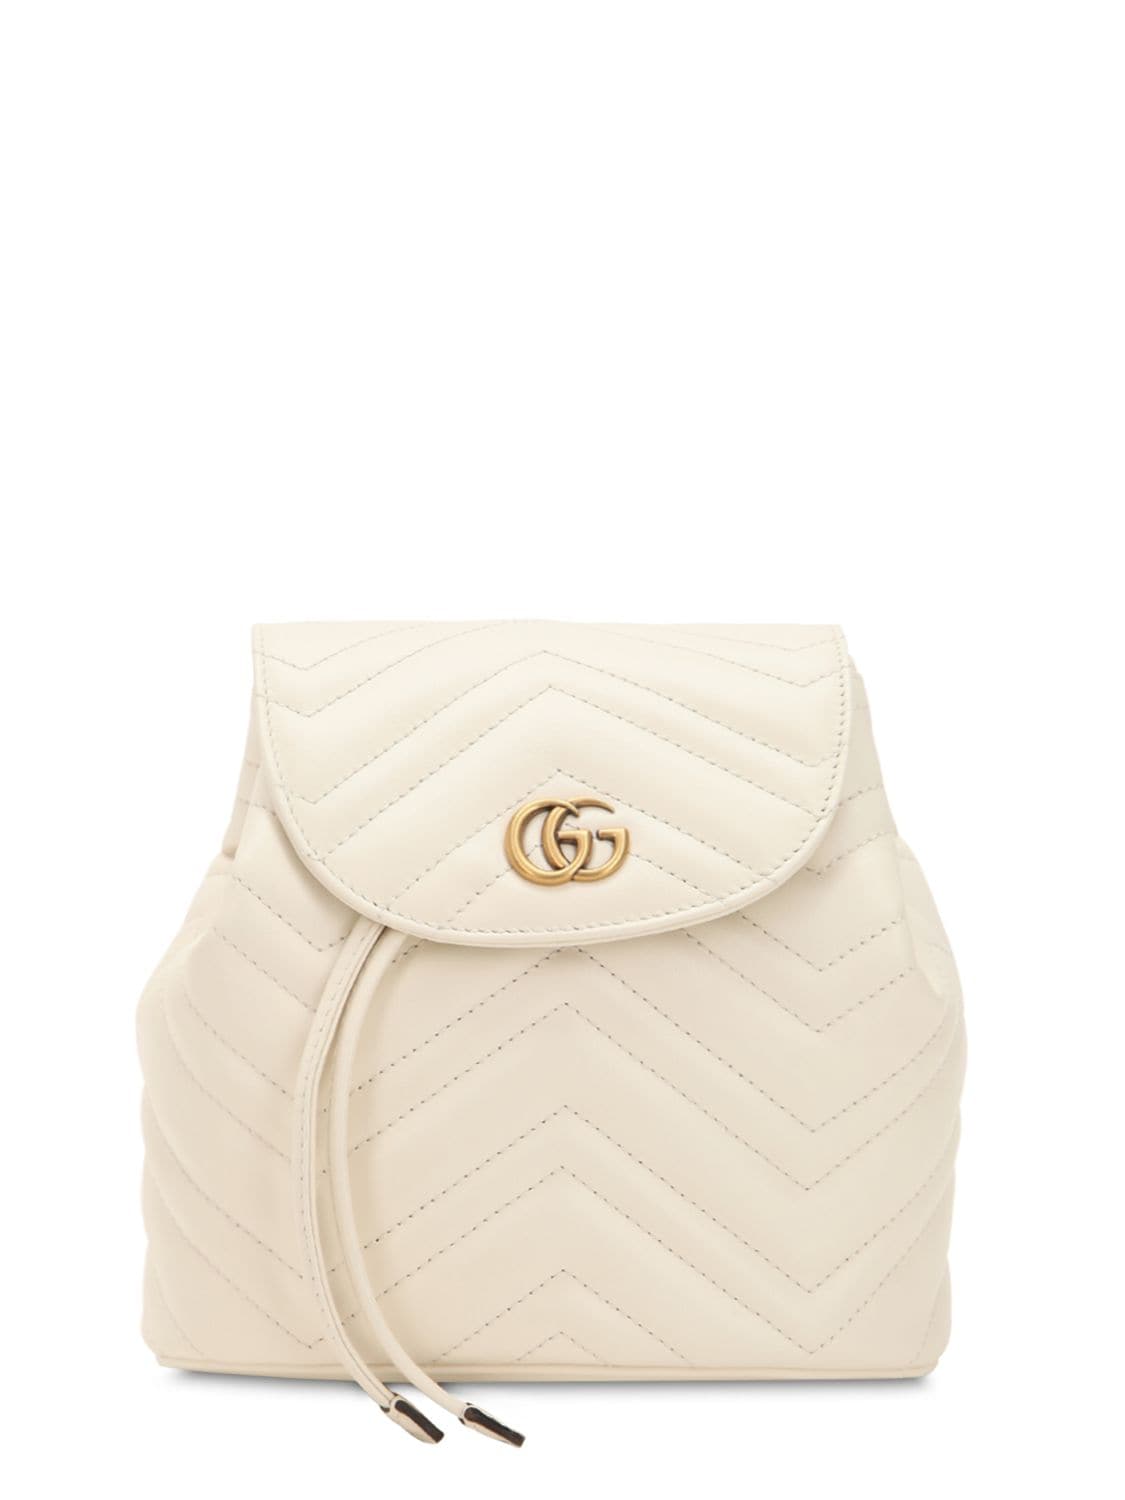 Gucci Mini Gg Marmont Leather Backpack In White